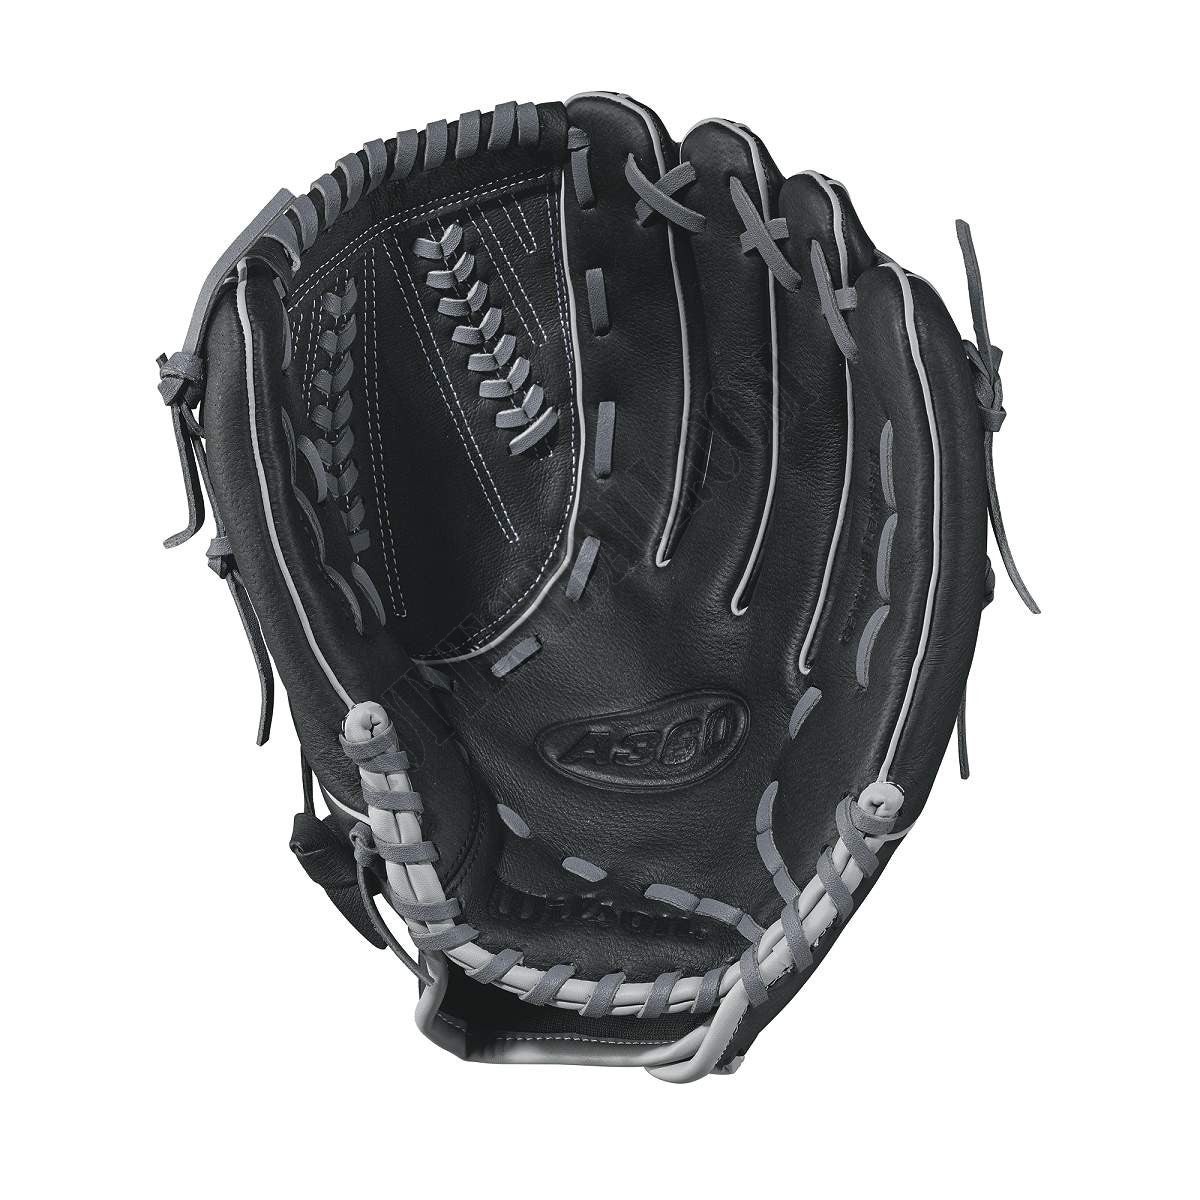 A360 13" Slowpitch Glove - Right Hand Throw ● Wilson Promotions - -2